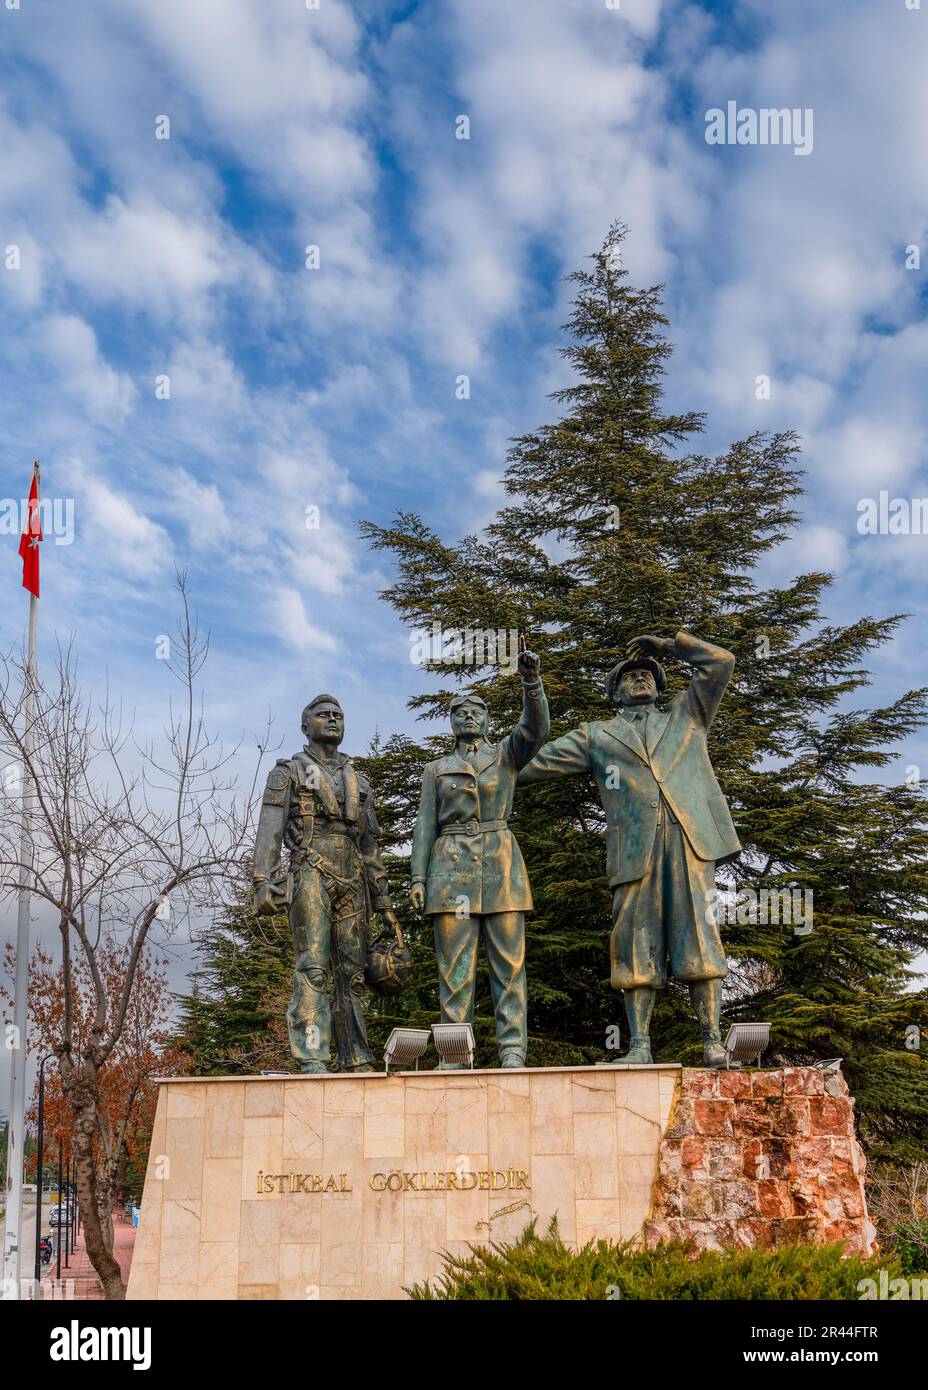 Merzifon, Amasya, Turkey - November 27, 2022: The Ataturk Statue view. The Statue composition is about aviation and 'The future is the sky' written on Stock Photo